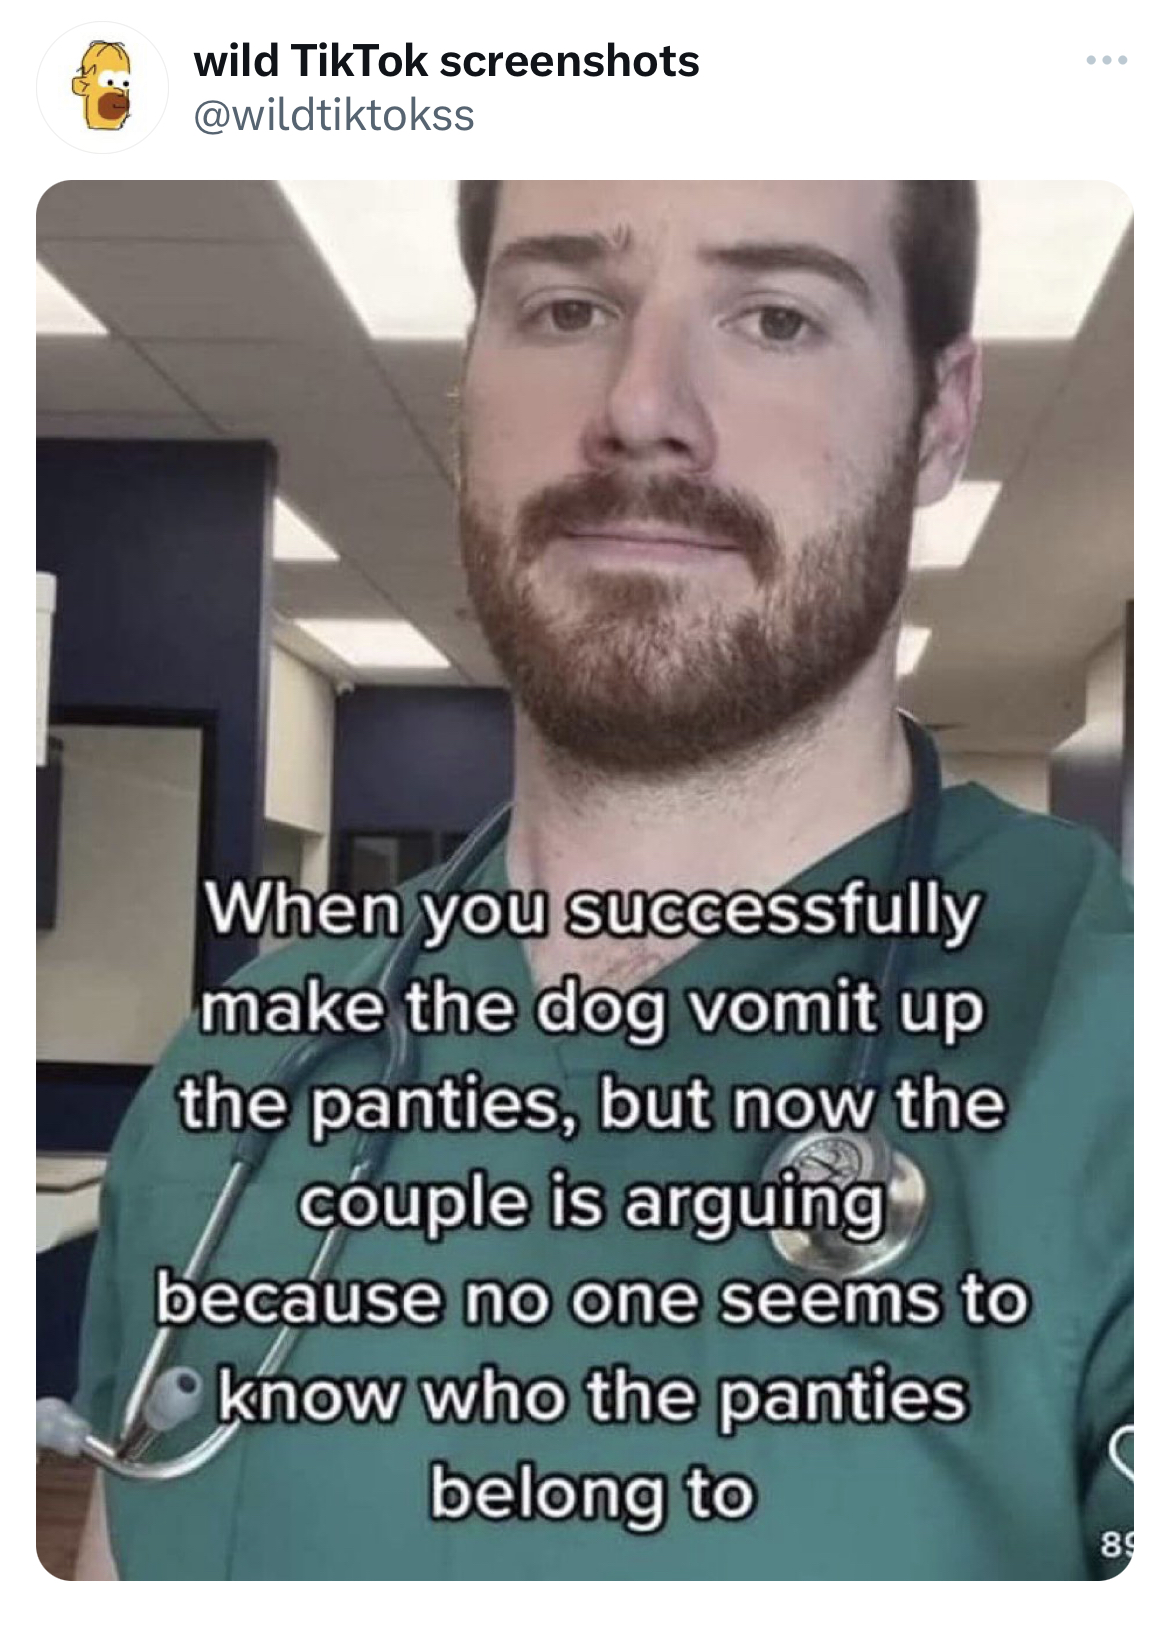 savage tweets - wild TikTok screenshots When you successfully make the dog vomit up the panties, but now the couple is arguing because no one seems to know who the panties belong to www 89